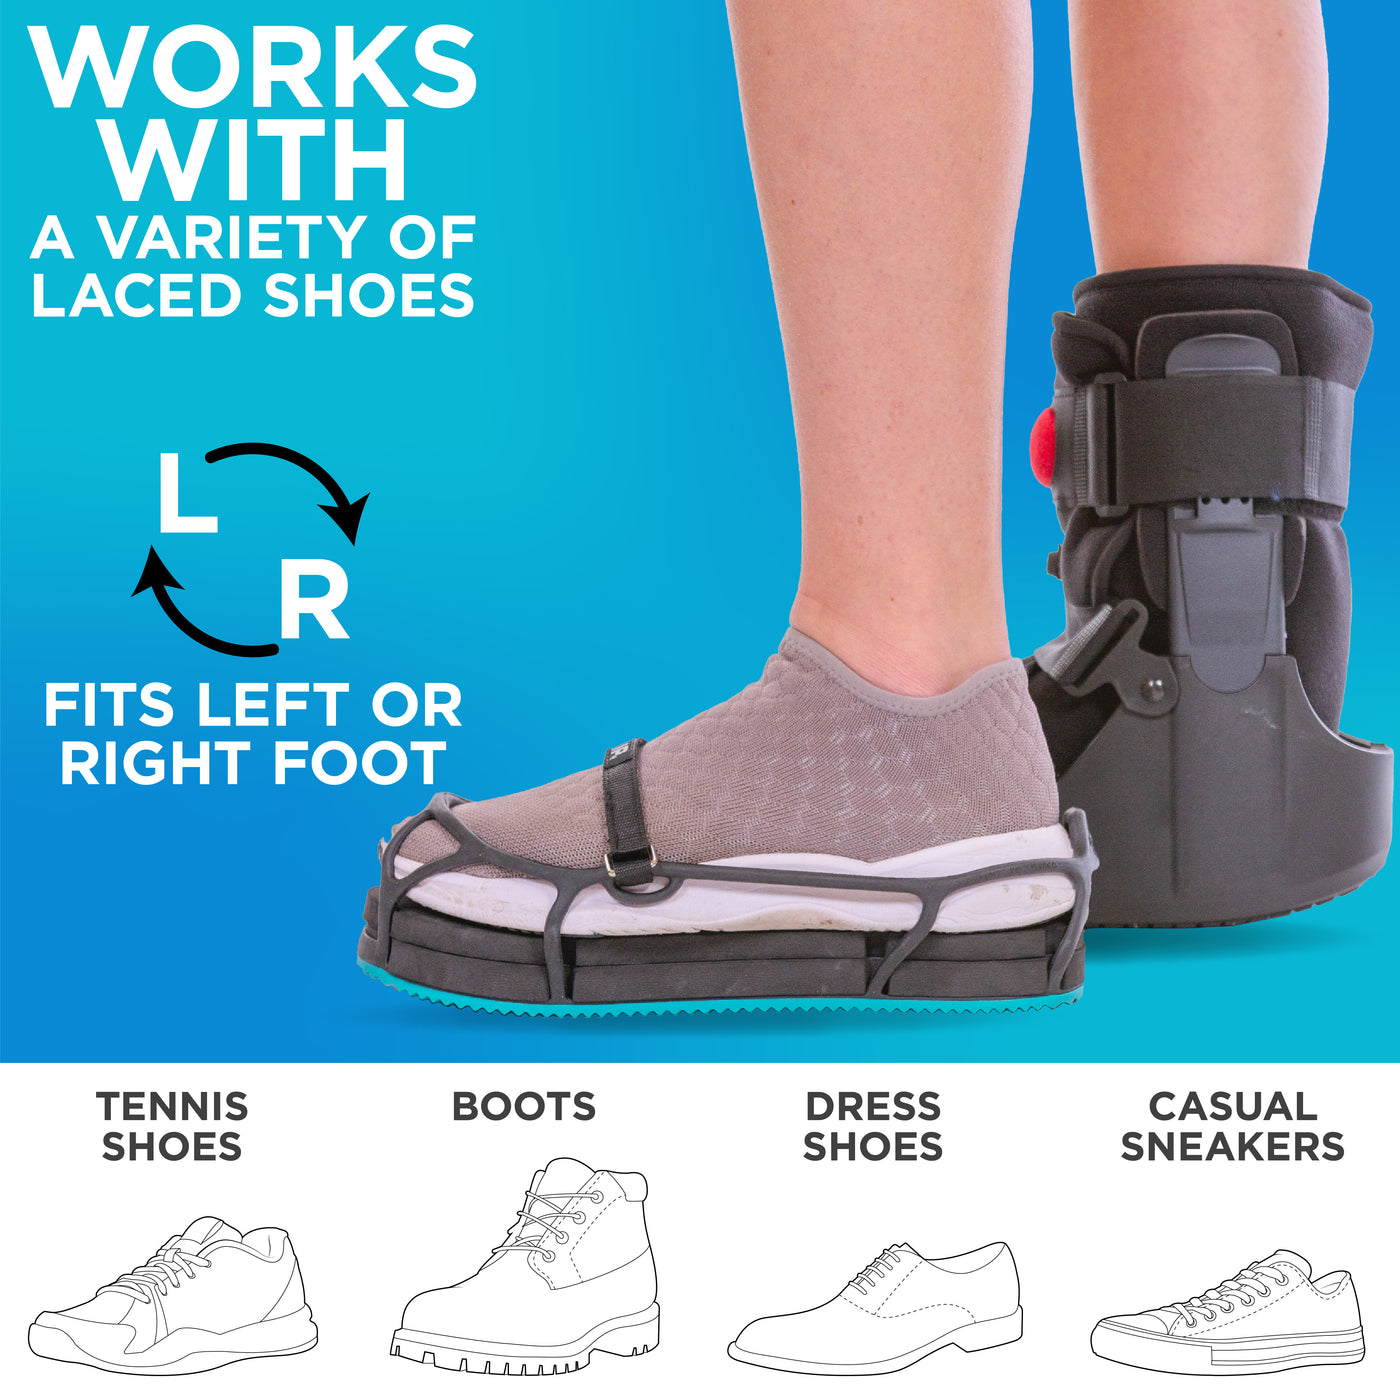 the even ups for shoes allow you to walk with a natural gait while wearing a medical shoe